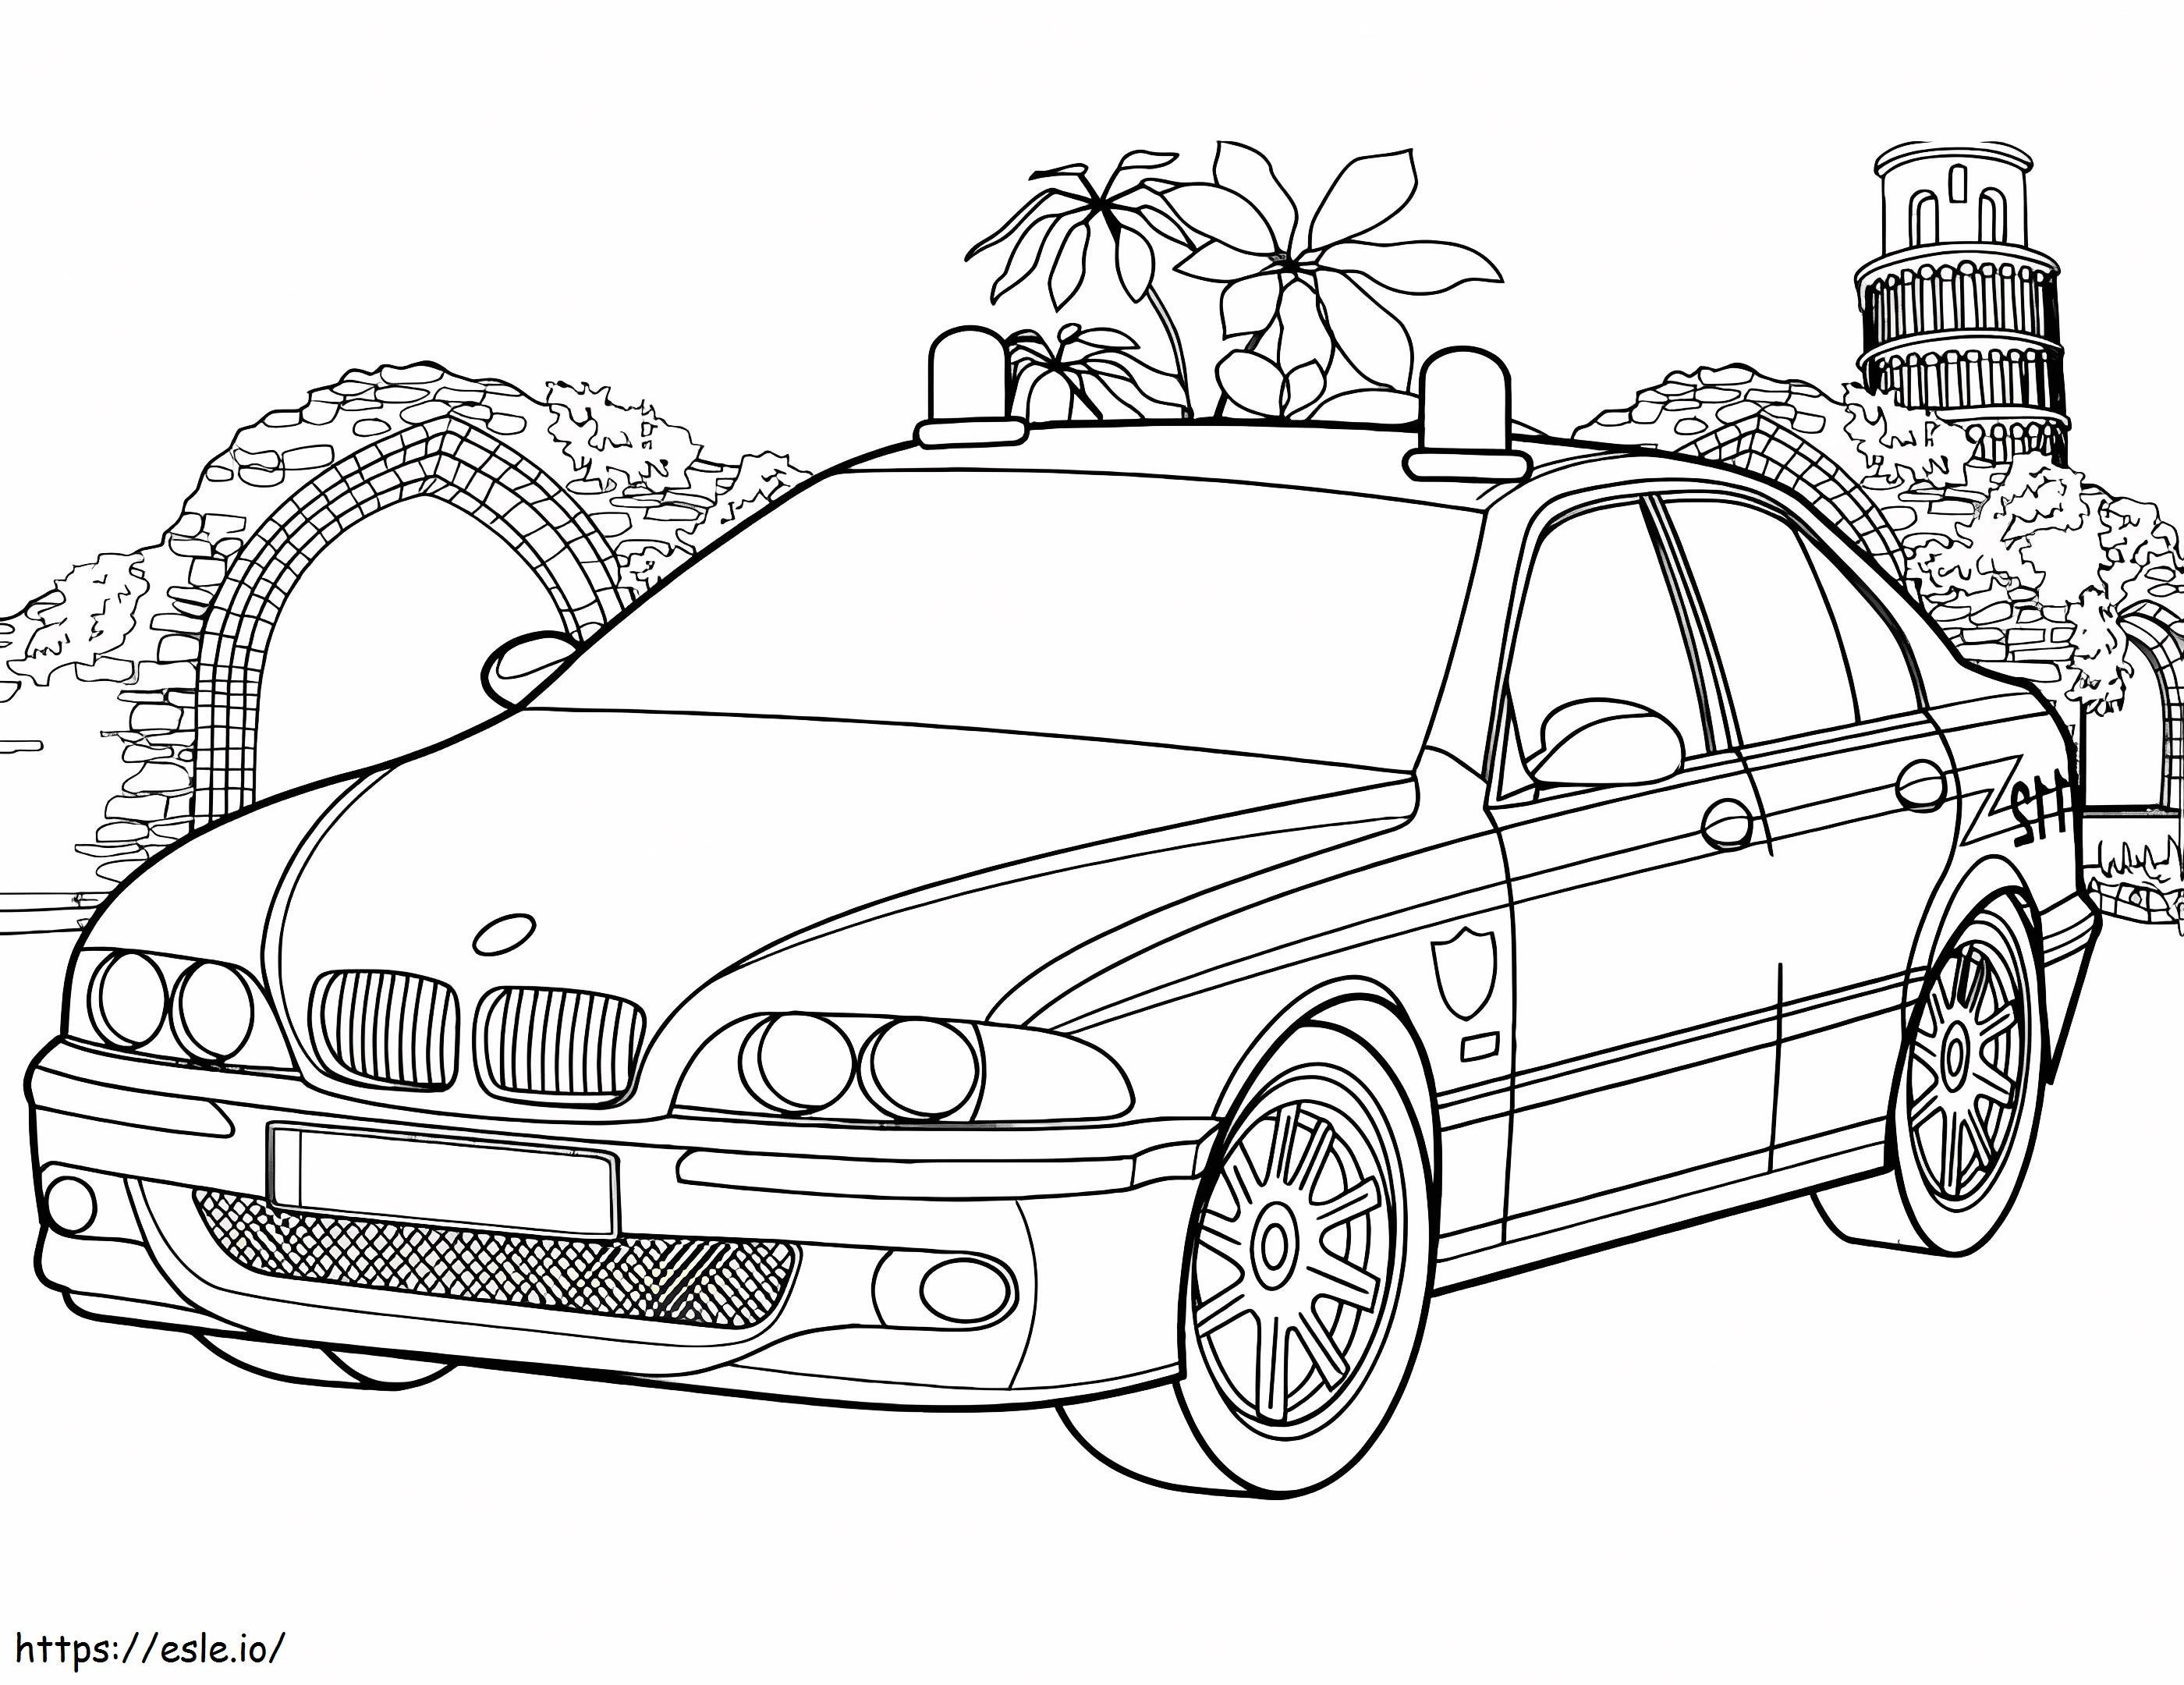 BMW Police Car coloring page